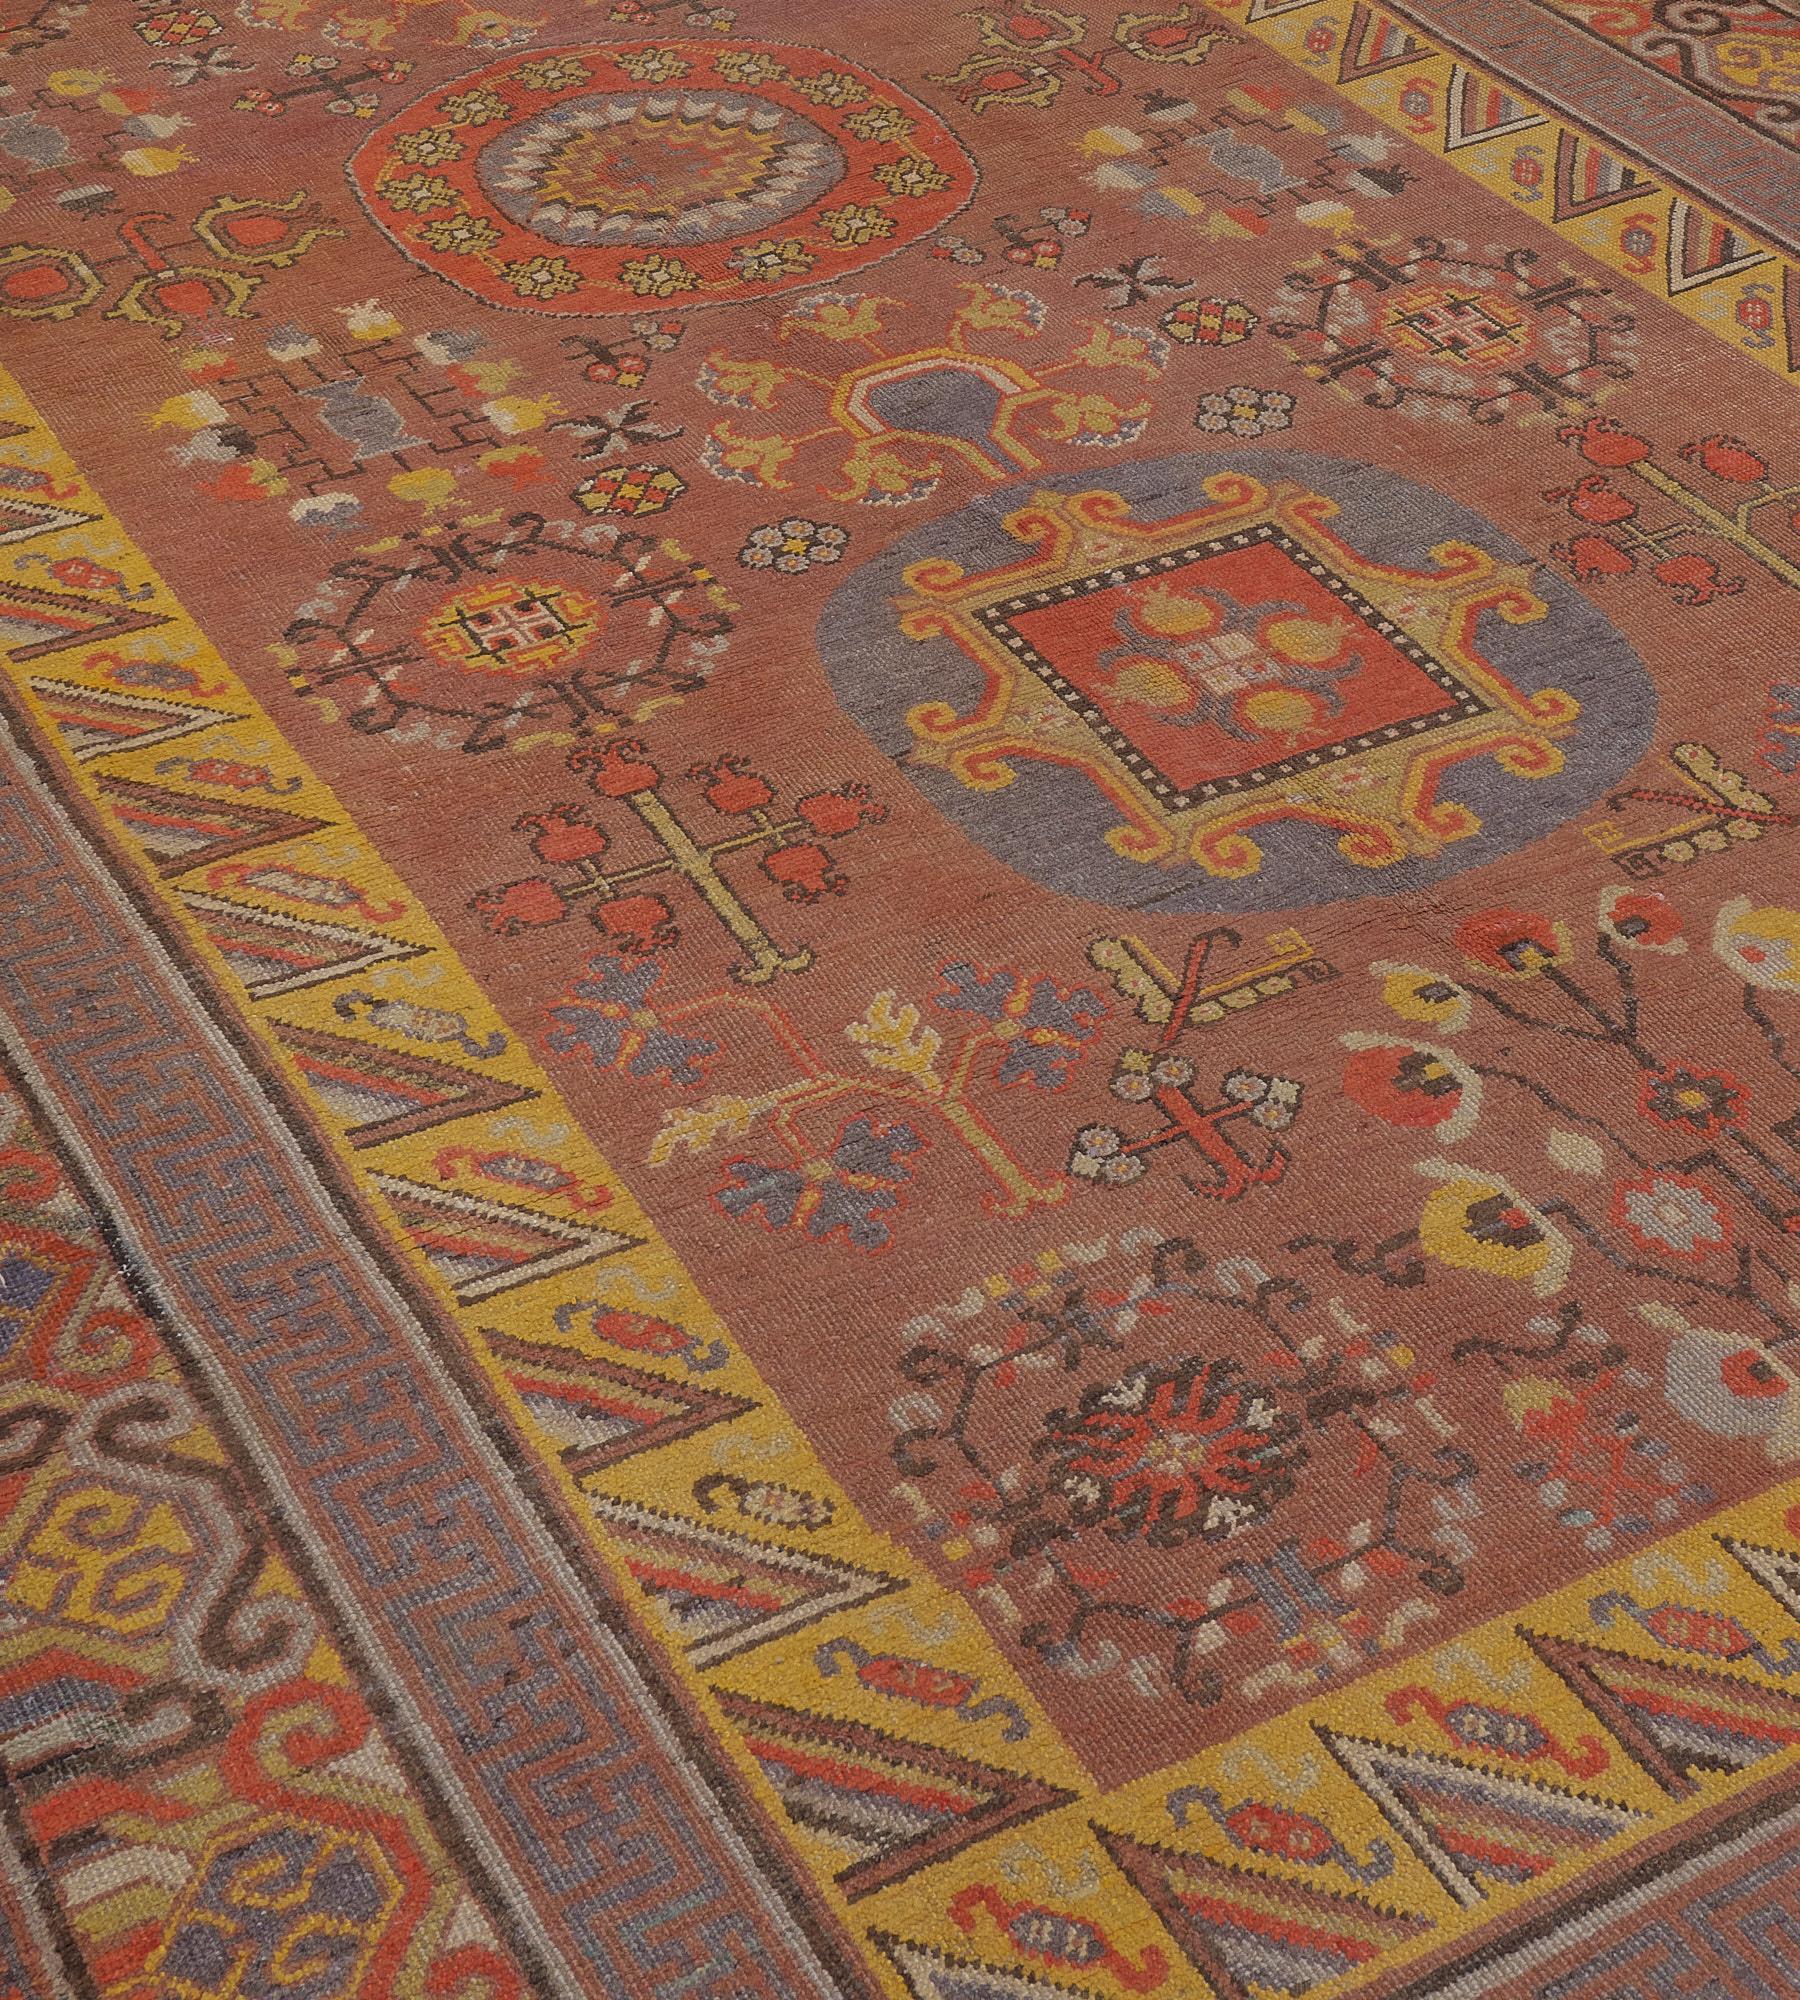 This traditional hand-woven Samarkand Khotan rug has a rust field with a profusion of auspicious symbols and pomegranate motif enclosing a triple column of roundel medallions, in a profusion of tradition polychrome Chinese borders.